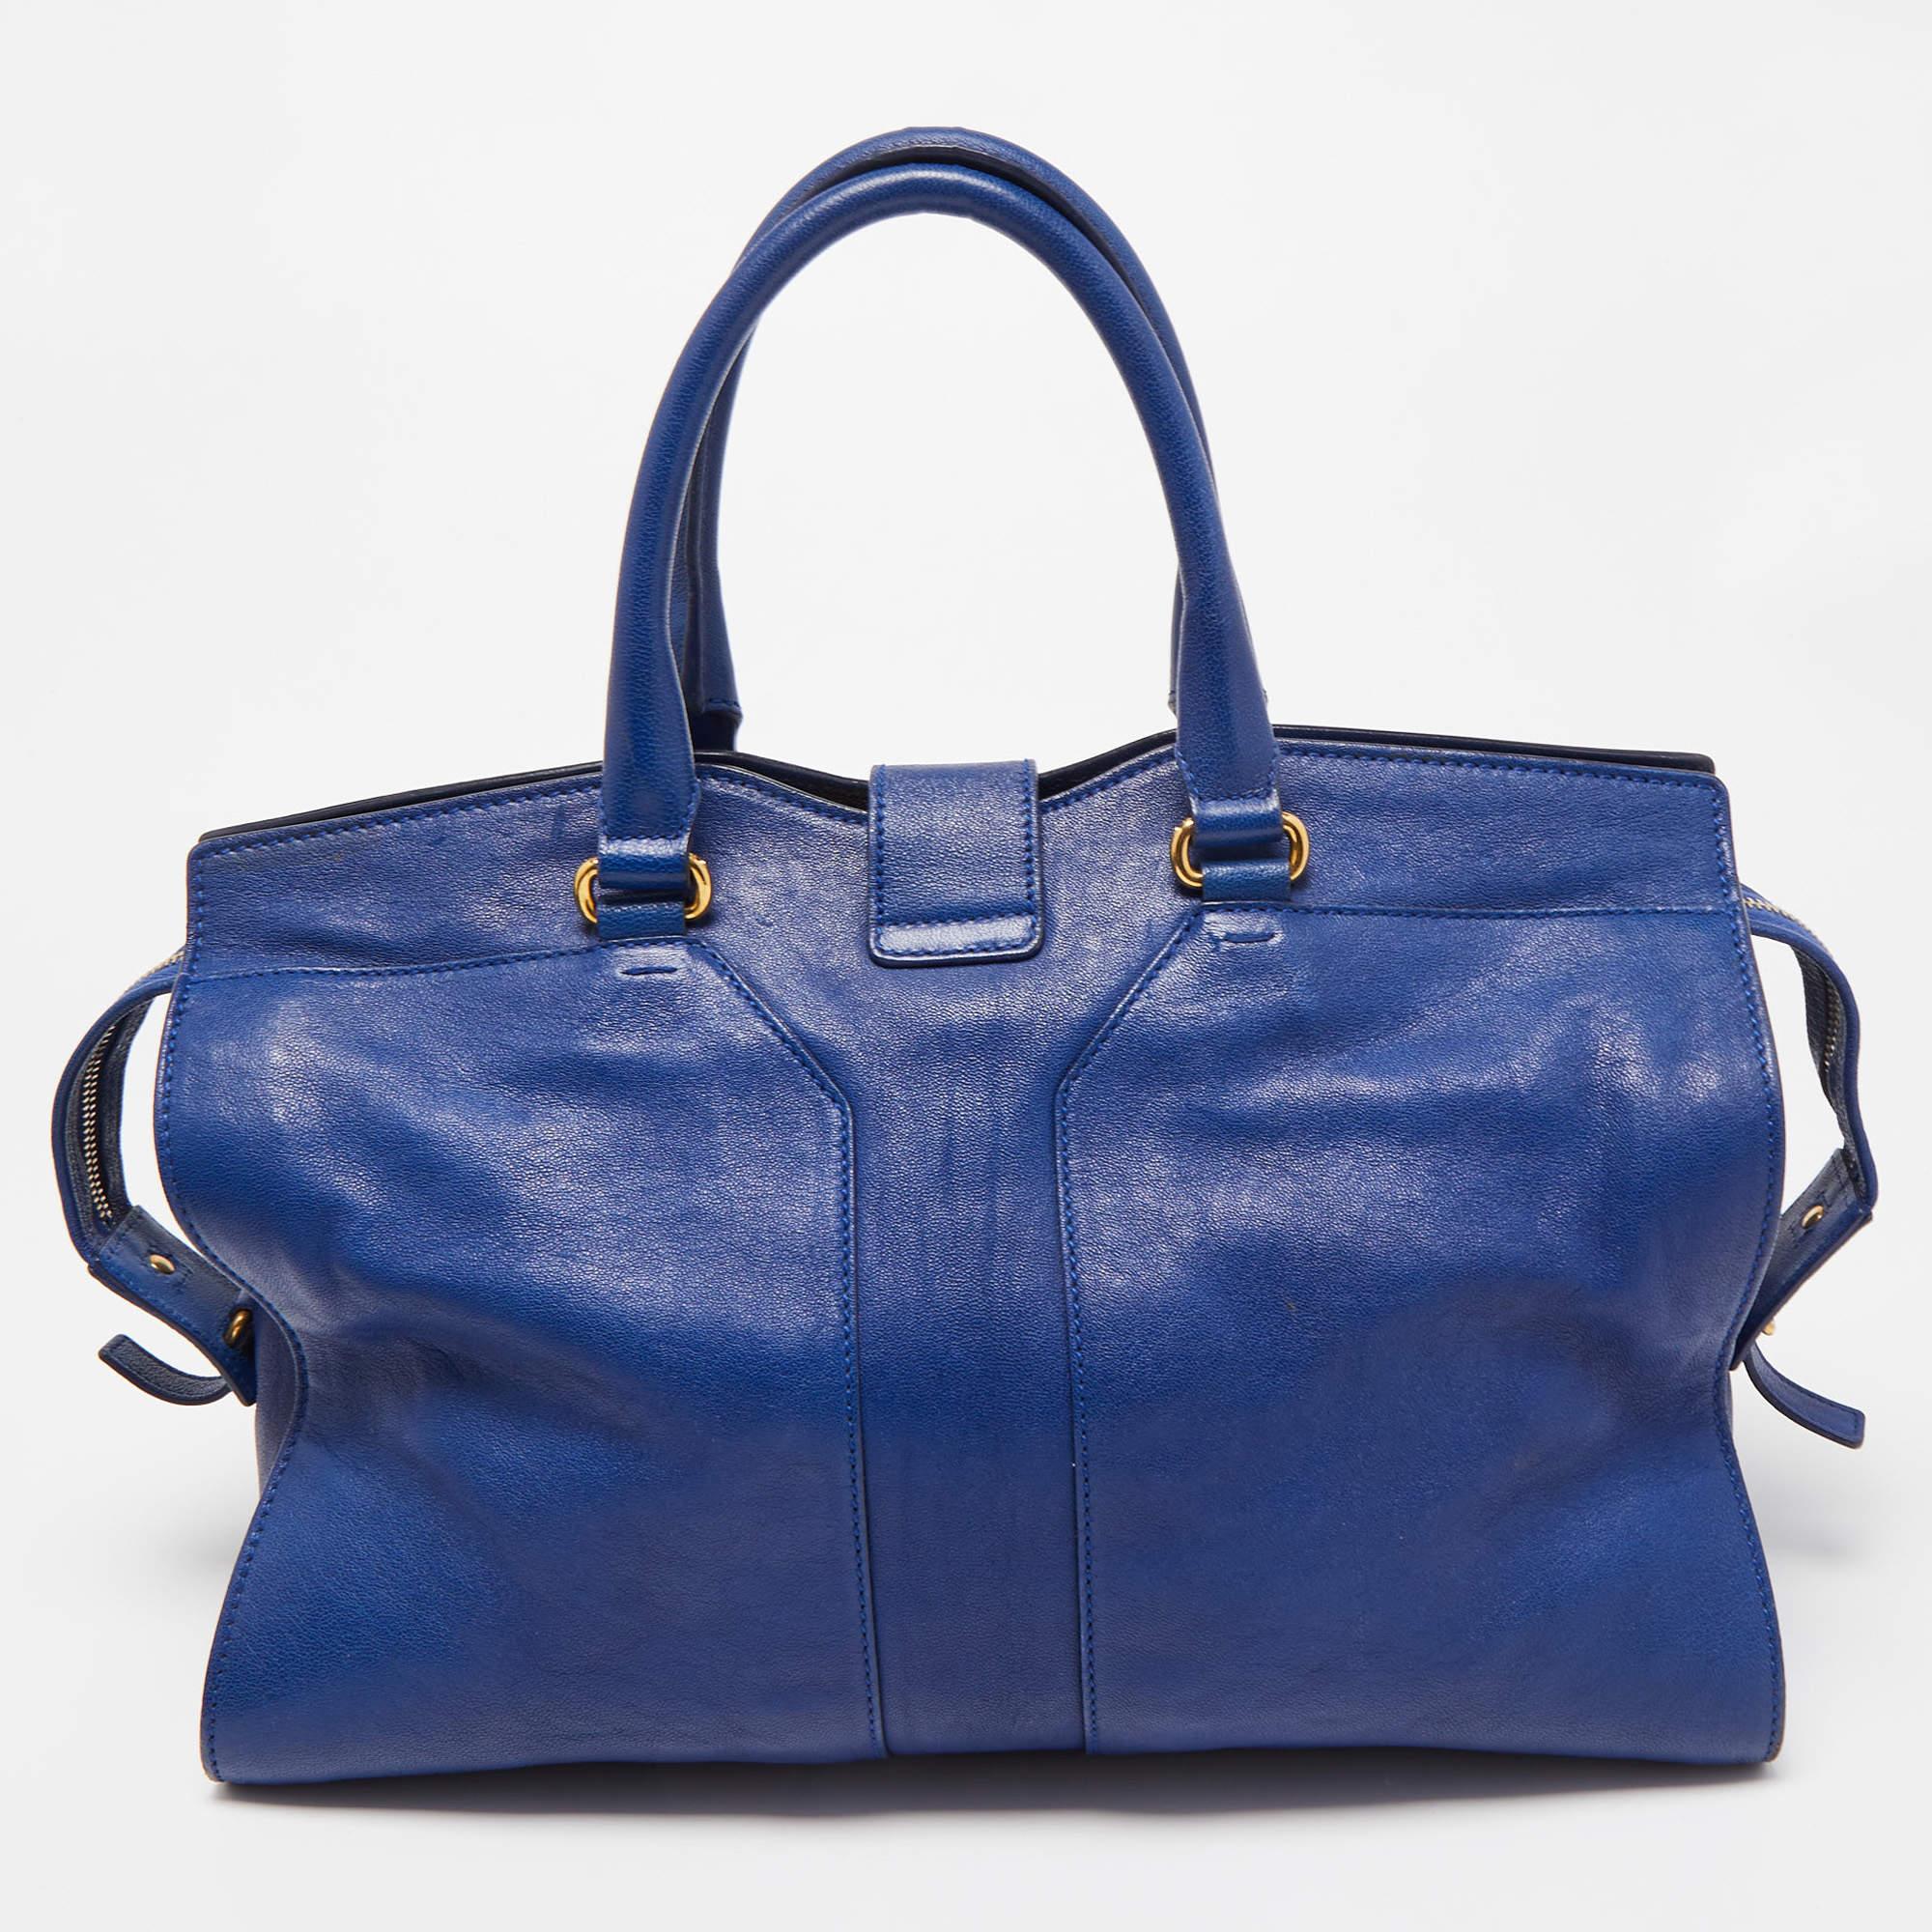 Yves Saint Laurent Blue Leather Medium Cabas Chyc Tote For Sale 12